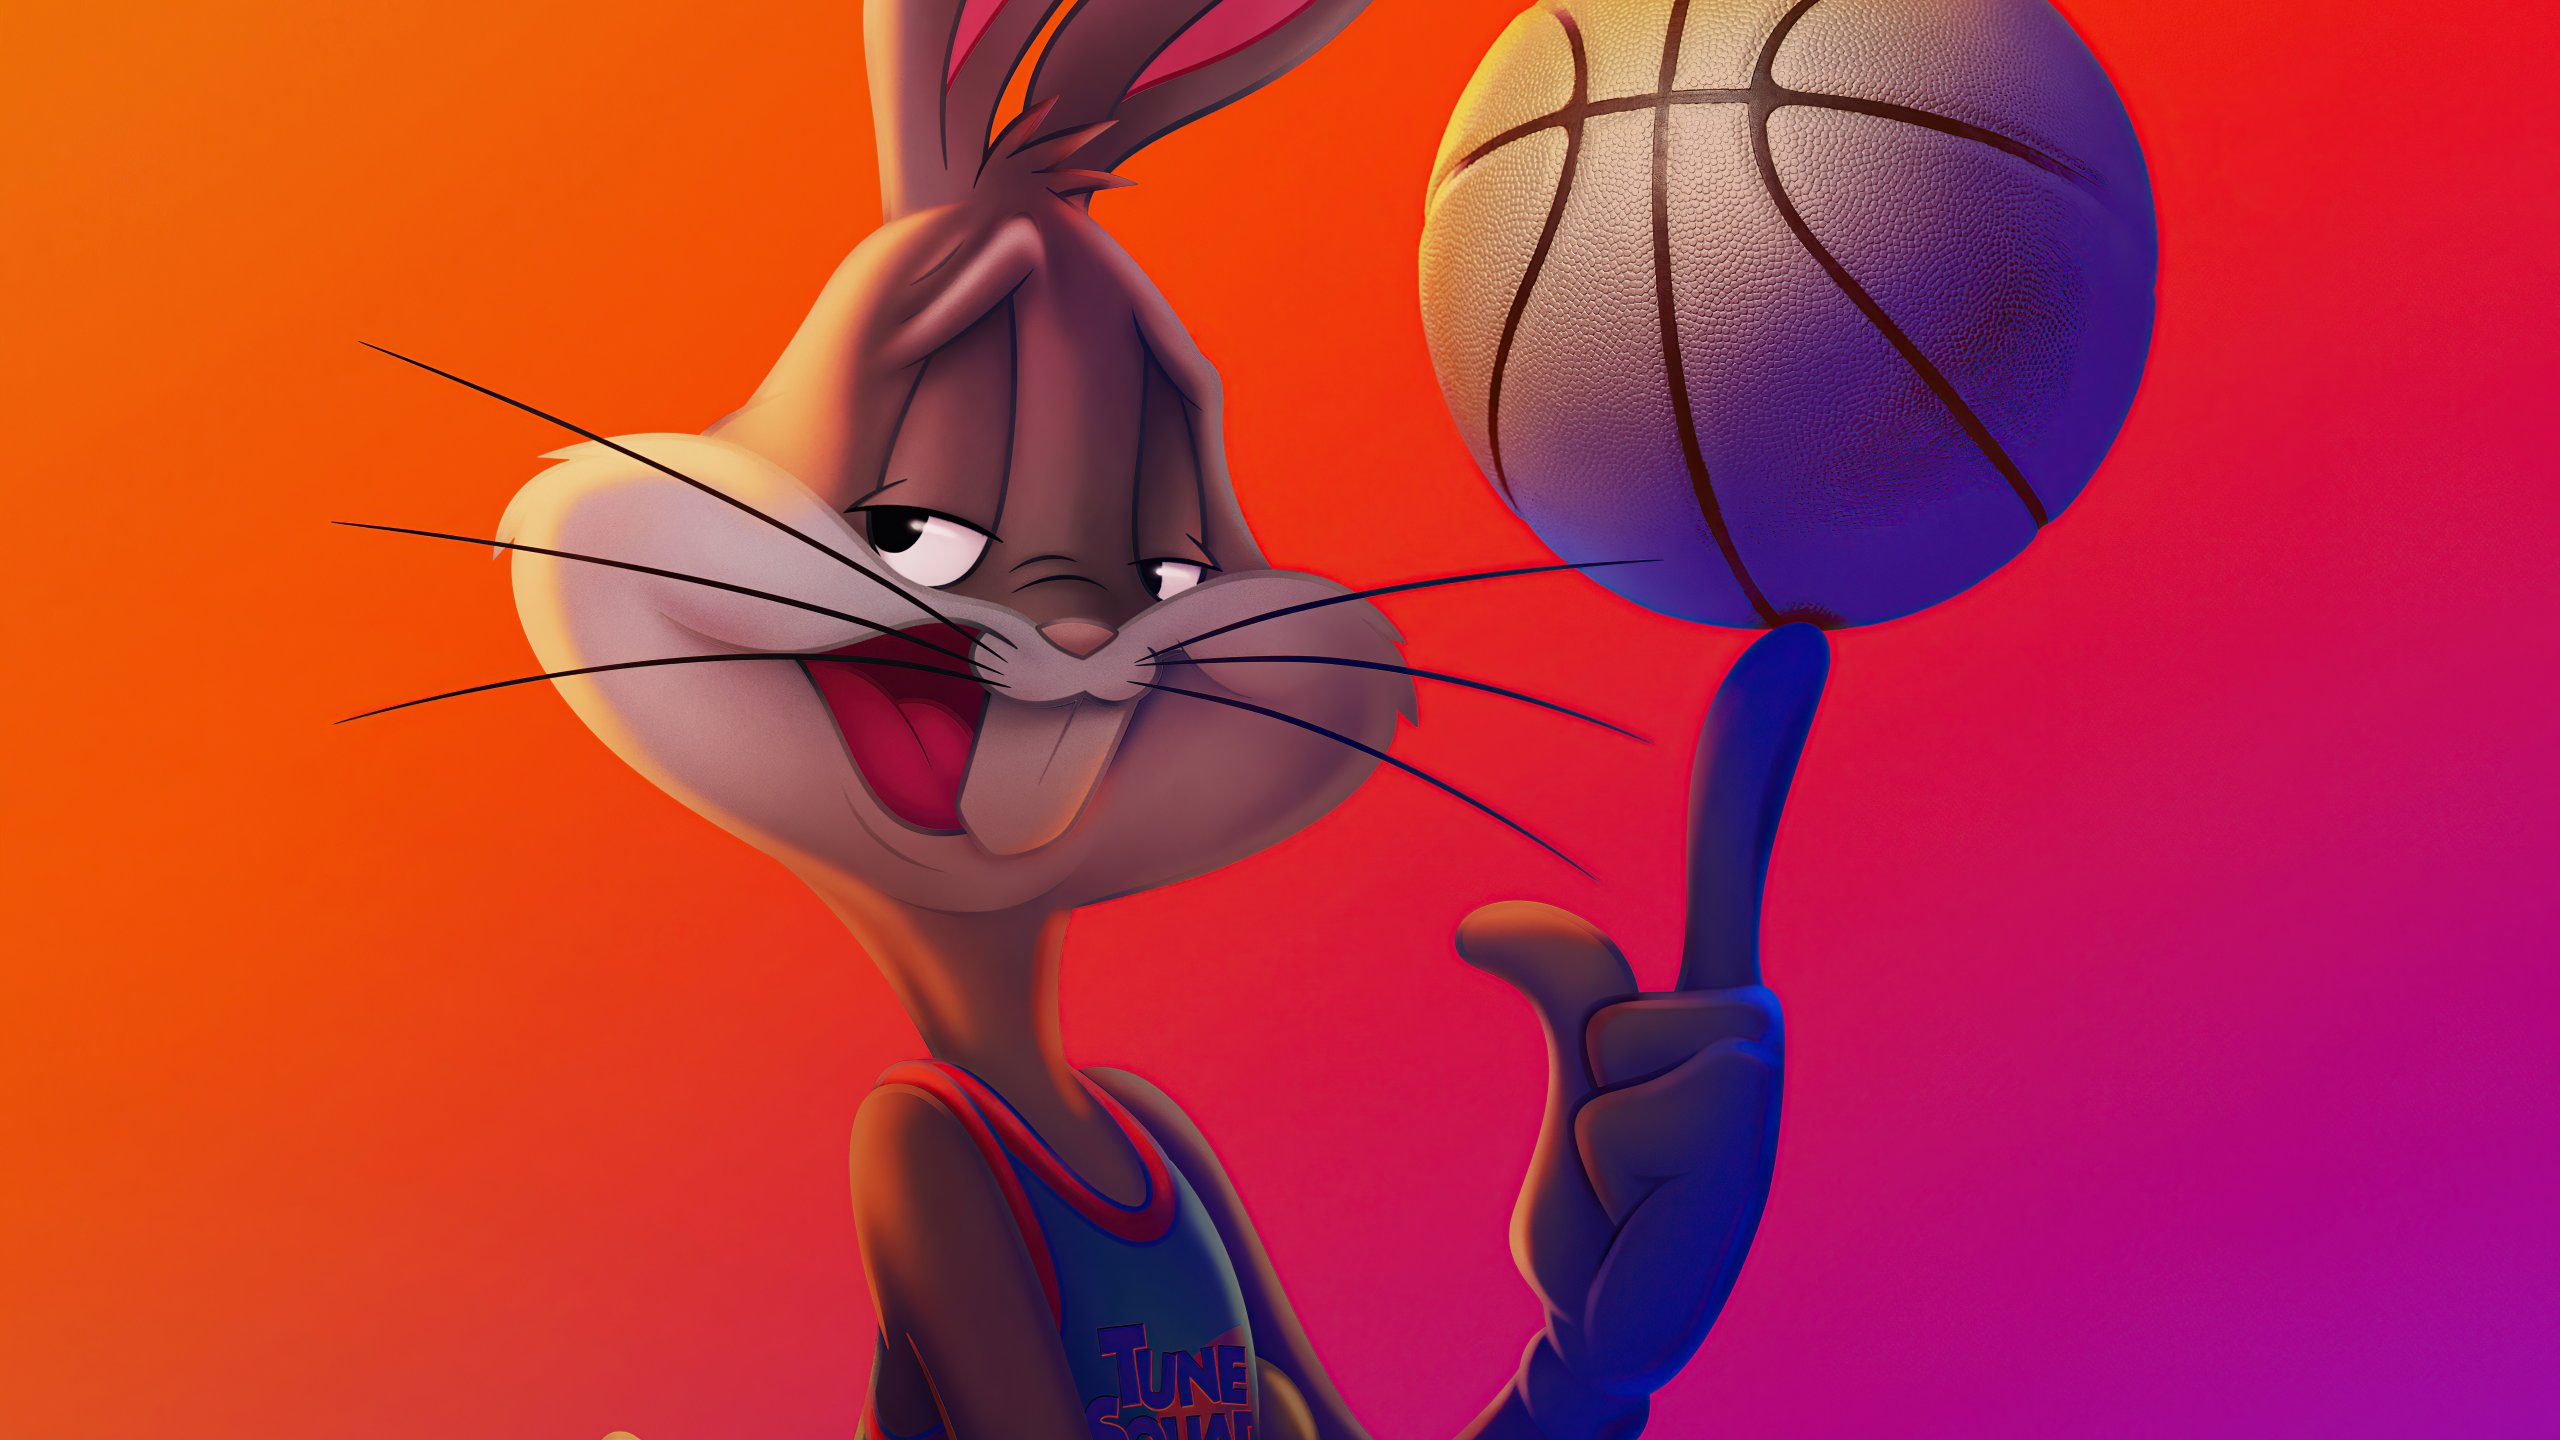 Bugs Bunny Space Jam A new Legacy Wallpaper 8k Ultra HD ID:7576